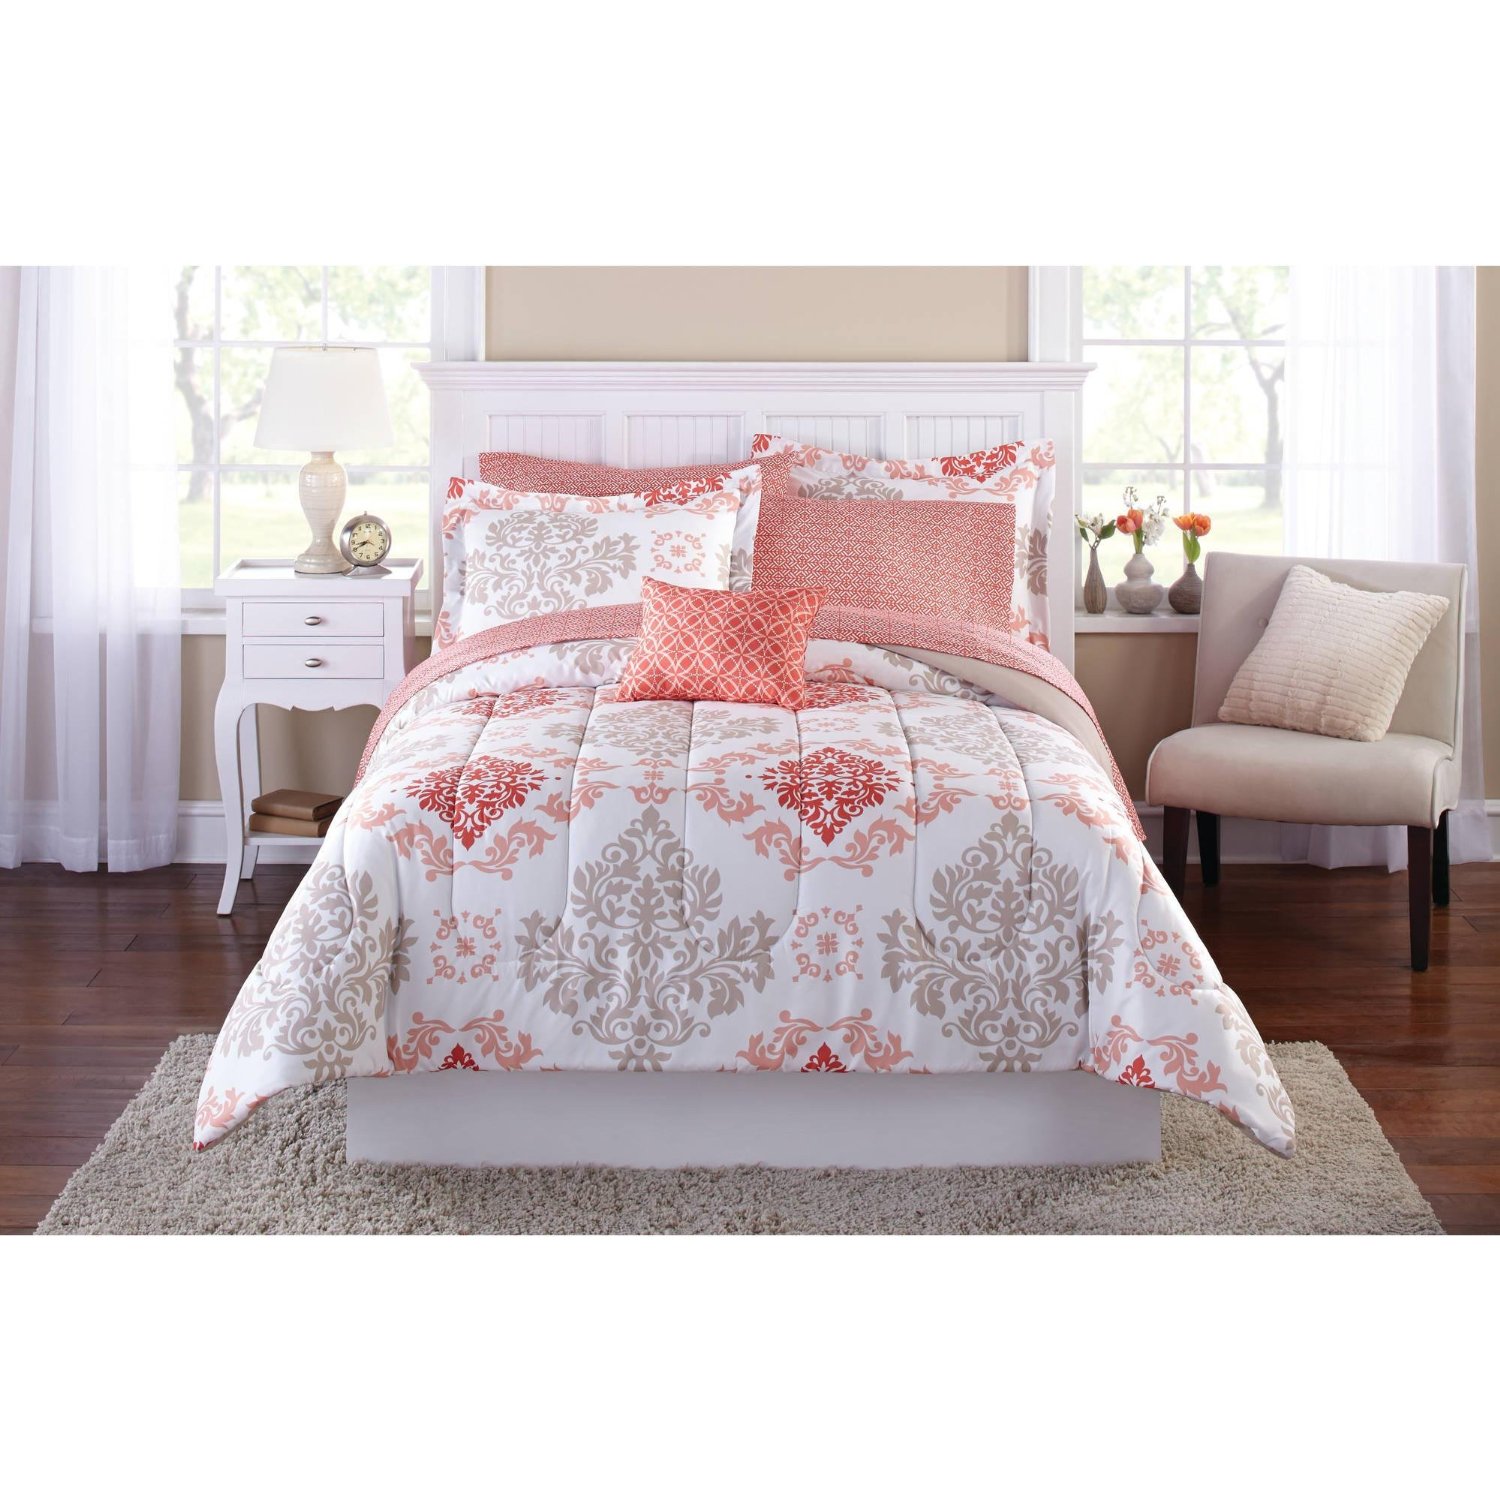 Teen Girls Pink Coral Damask 6 Piece Comforter Set, TWIN / TWIN XL Size Bed in A Bag